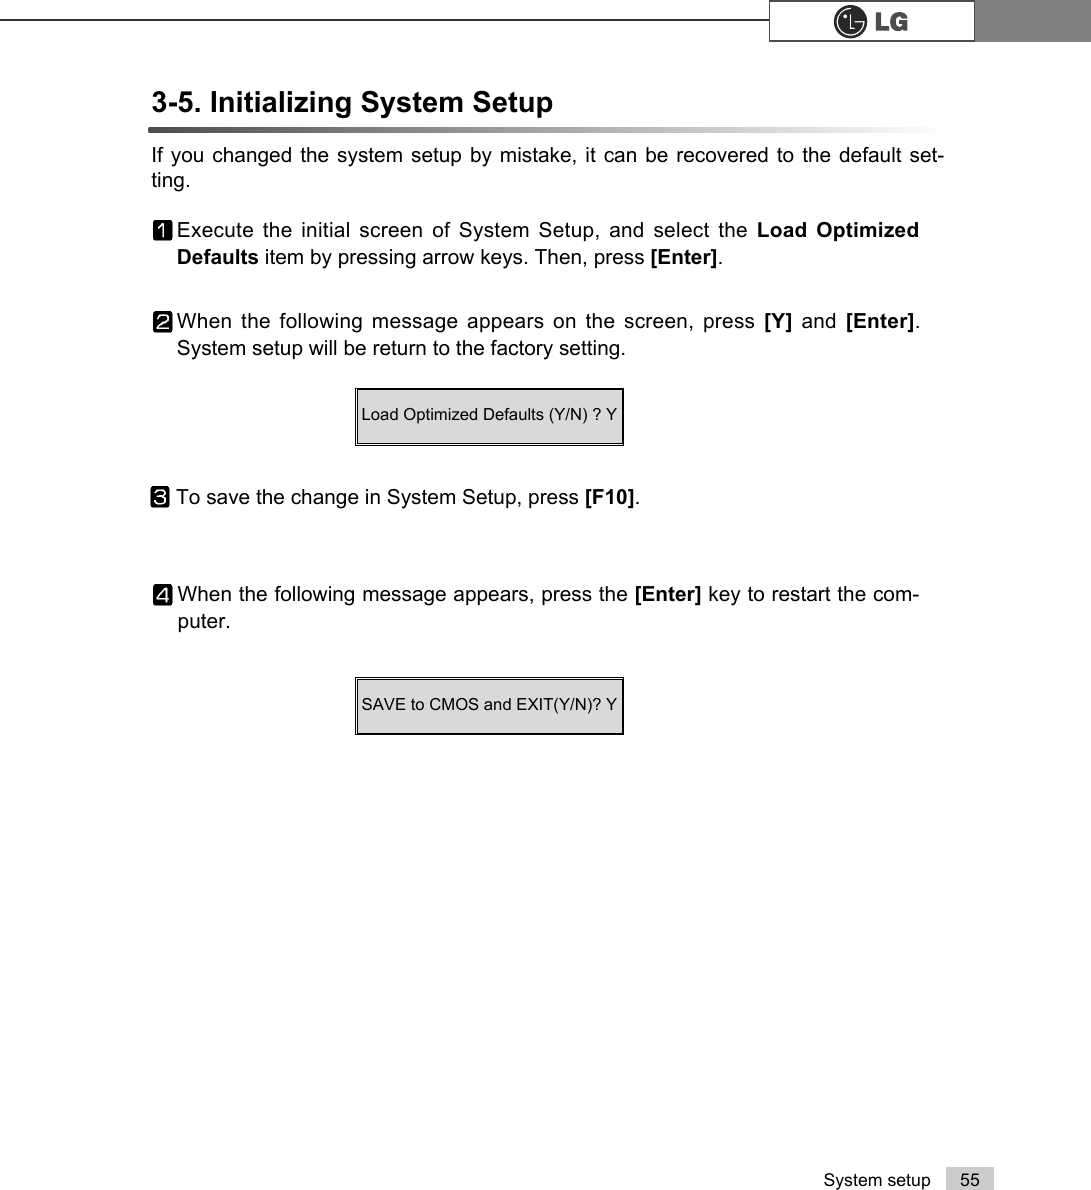 55System setup3-5. Initializing System Setup If you changed the system setup by mistake, it can be recovered to the default set-ting.Execute the initial screen of System Setup, and select the Load OptimizedDefaults item by pressing arrow keys. Then, press [Enter].When the following message appears on the screen, press [Y]  and  [Enter].System setup will be return to the factory setting.To save the change in System Setup, press [F10]. When the following message appears, press the [Enter] key to restart the com-puter.SAVE to CMOS and EXIT(Y/N)? Y Load Optimized Defaults (Y/N) ? Y